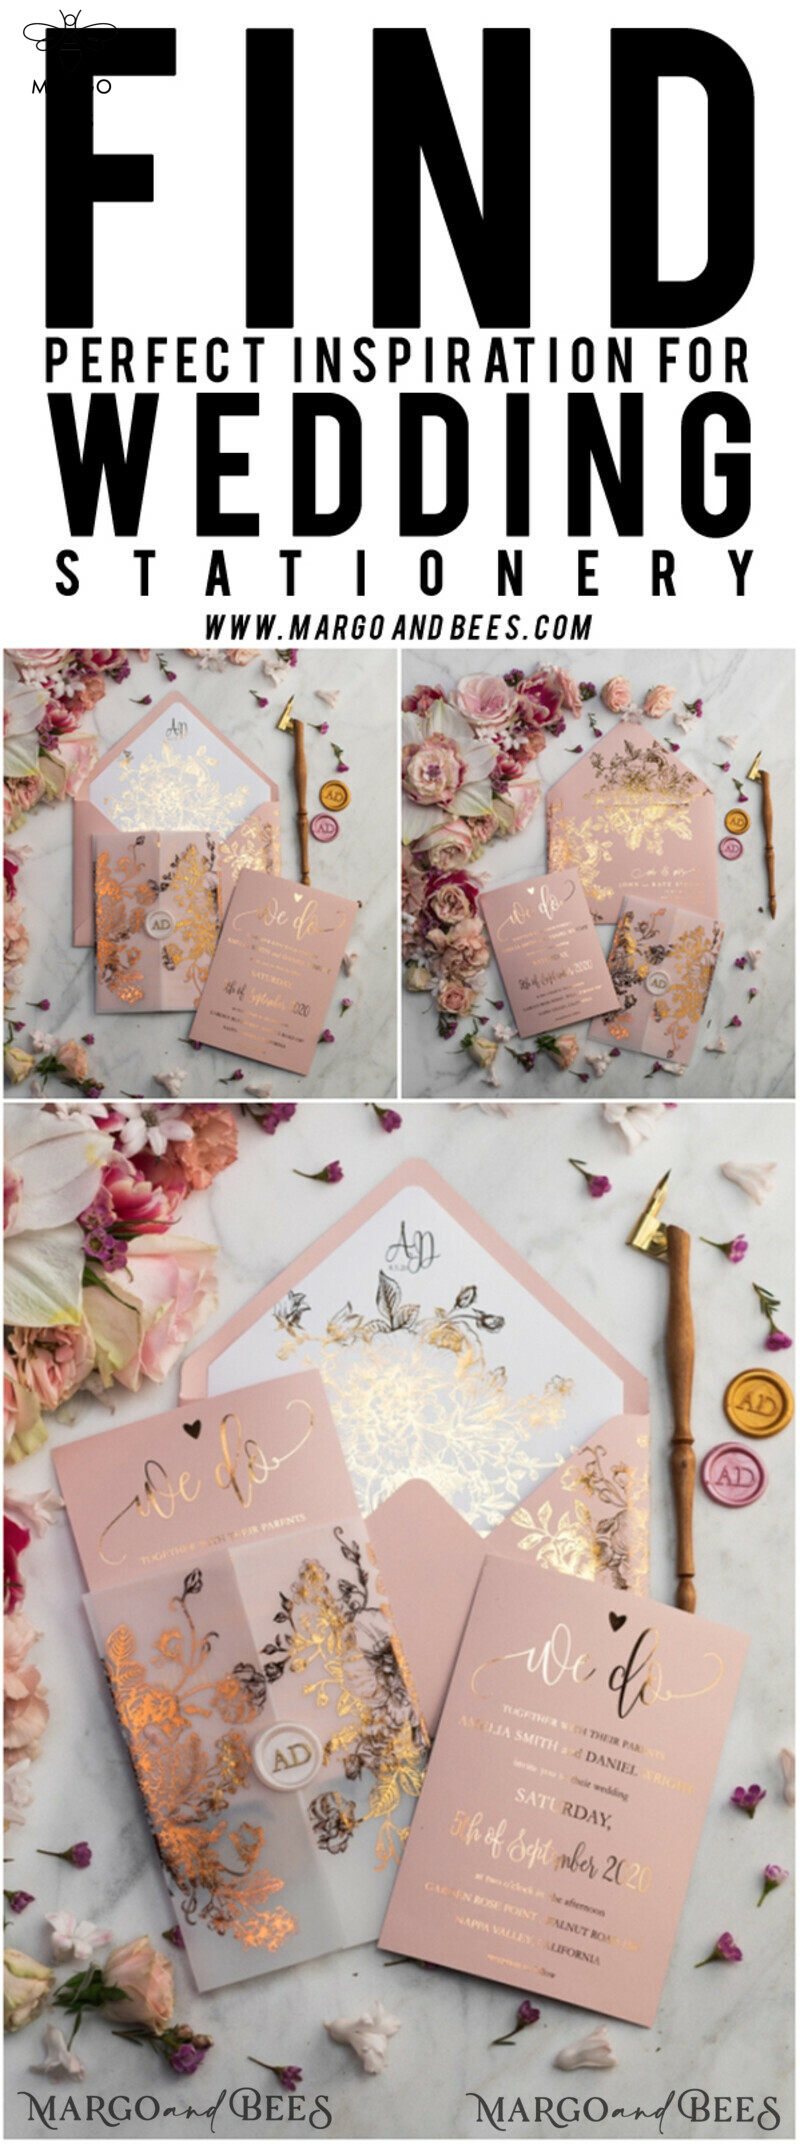 Luxury Vellum Gold Foil Wedding Invitations: Elegant Blush Pink Invitation Suite with Glamour Wedding Cards and Golden Shine-65